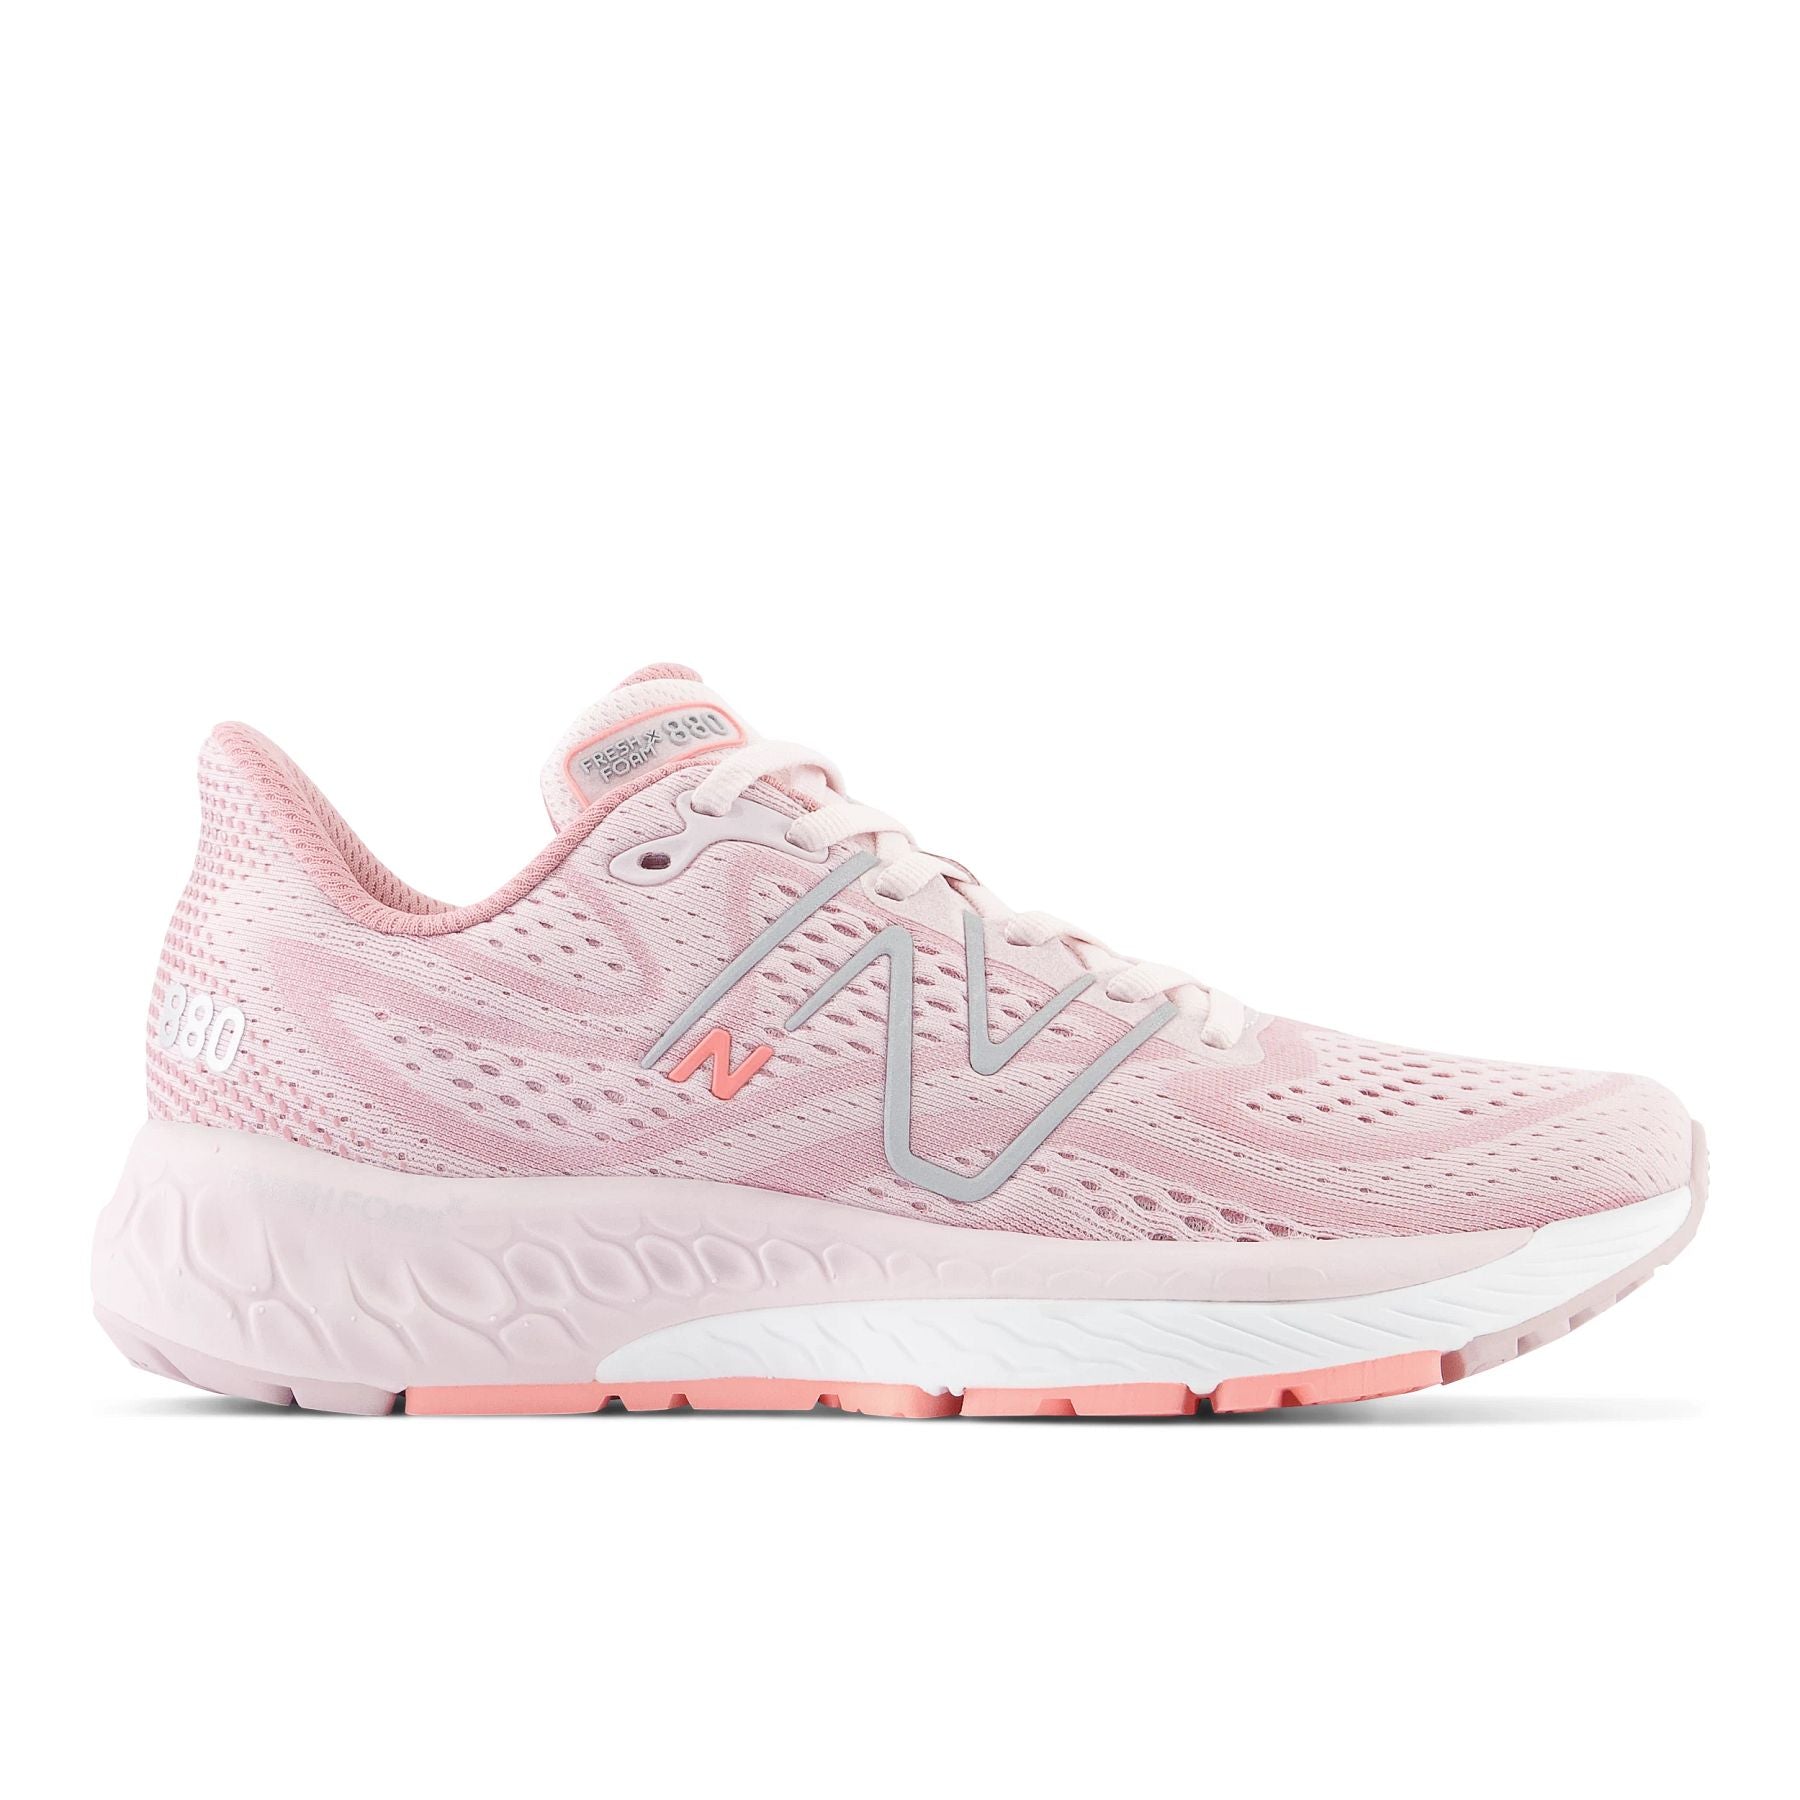 Lateral view of the Women's New Balance 880 V13 in the color Stone Pink